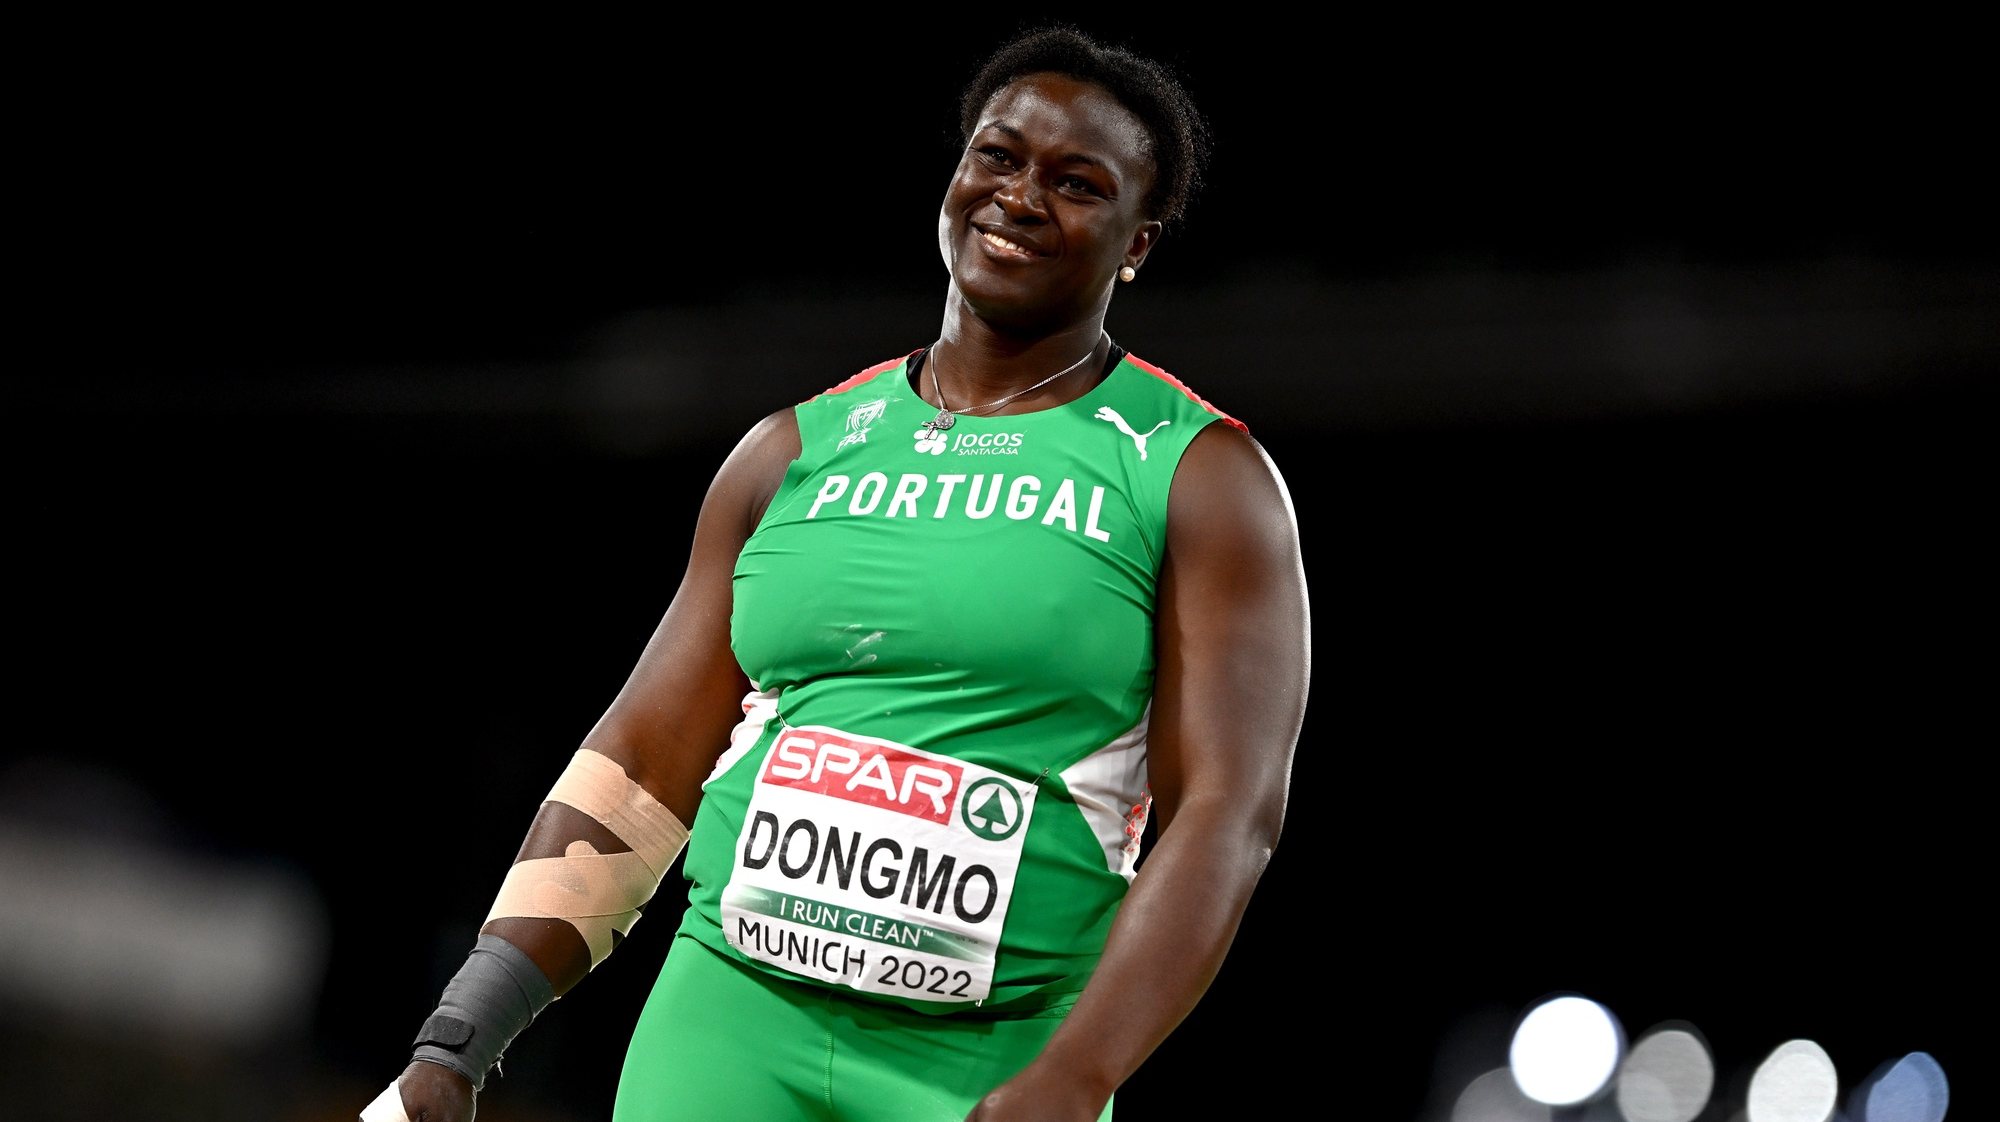 epa10123218 Auriol Dongmo of Portugal competes in the women&#039;s Shot Put final during the Athletics events at the European Championships Munich 2022, Munich, Germany, 15 August 2022. The championships will feature nine Olympic sports, Athletics, Beach Volleyball, Canoe Sprint, Cycling, Artistic Gymnastics, Rowing, Sport Climbing, Table Tennis and Triathlon.  EPA/CHRISTIAN BRUNA